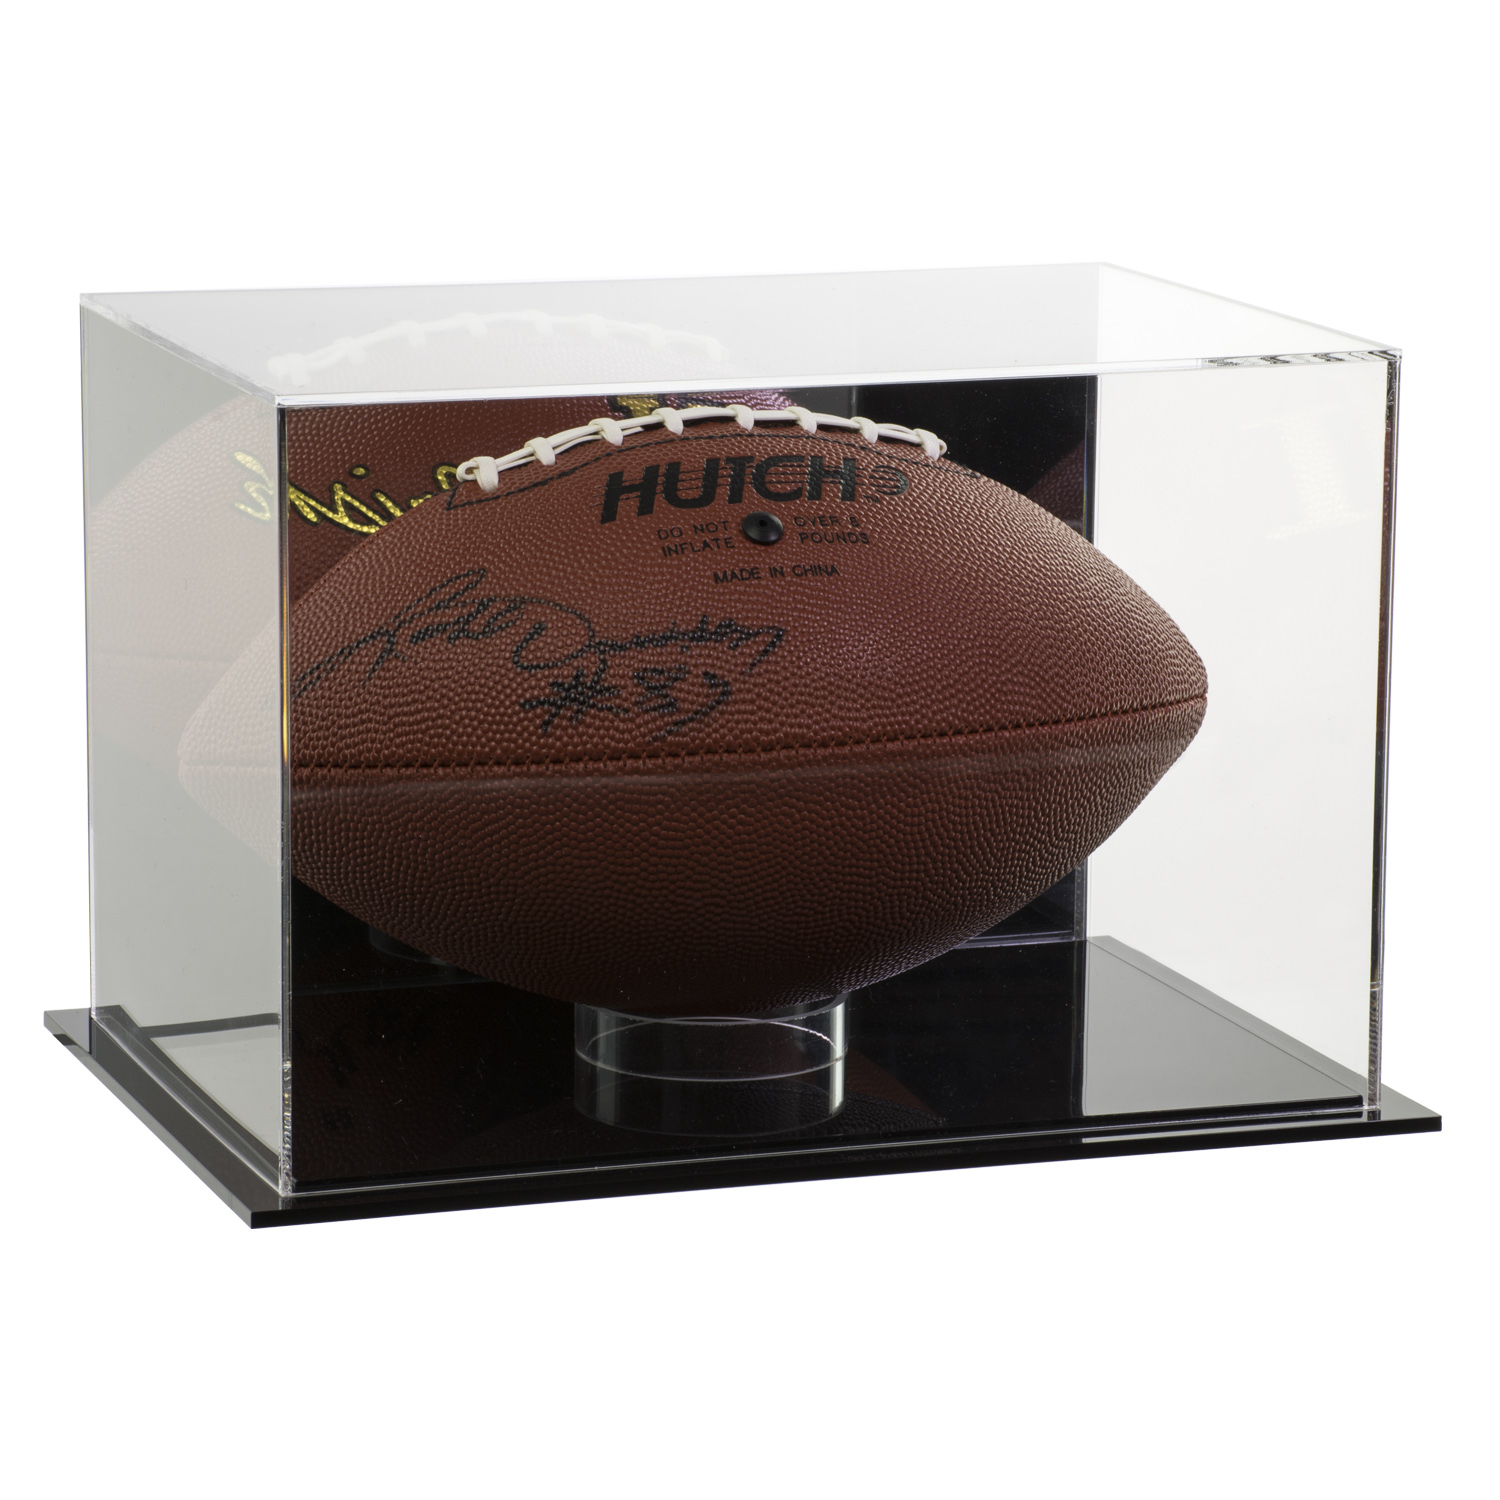 1 BCW Adhesive Back Mirror for BallQube Football Holder Display Cases 